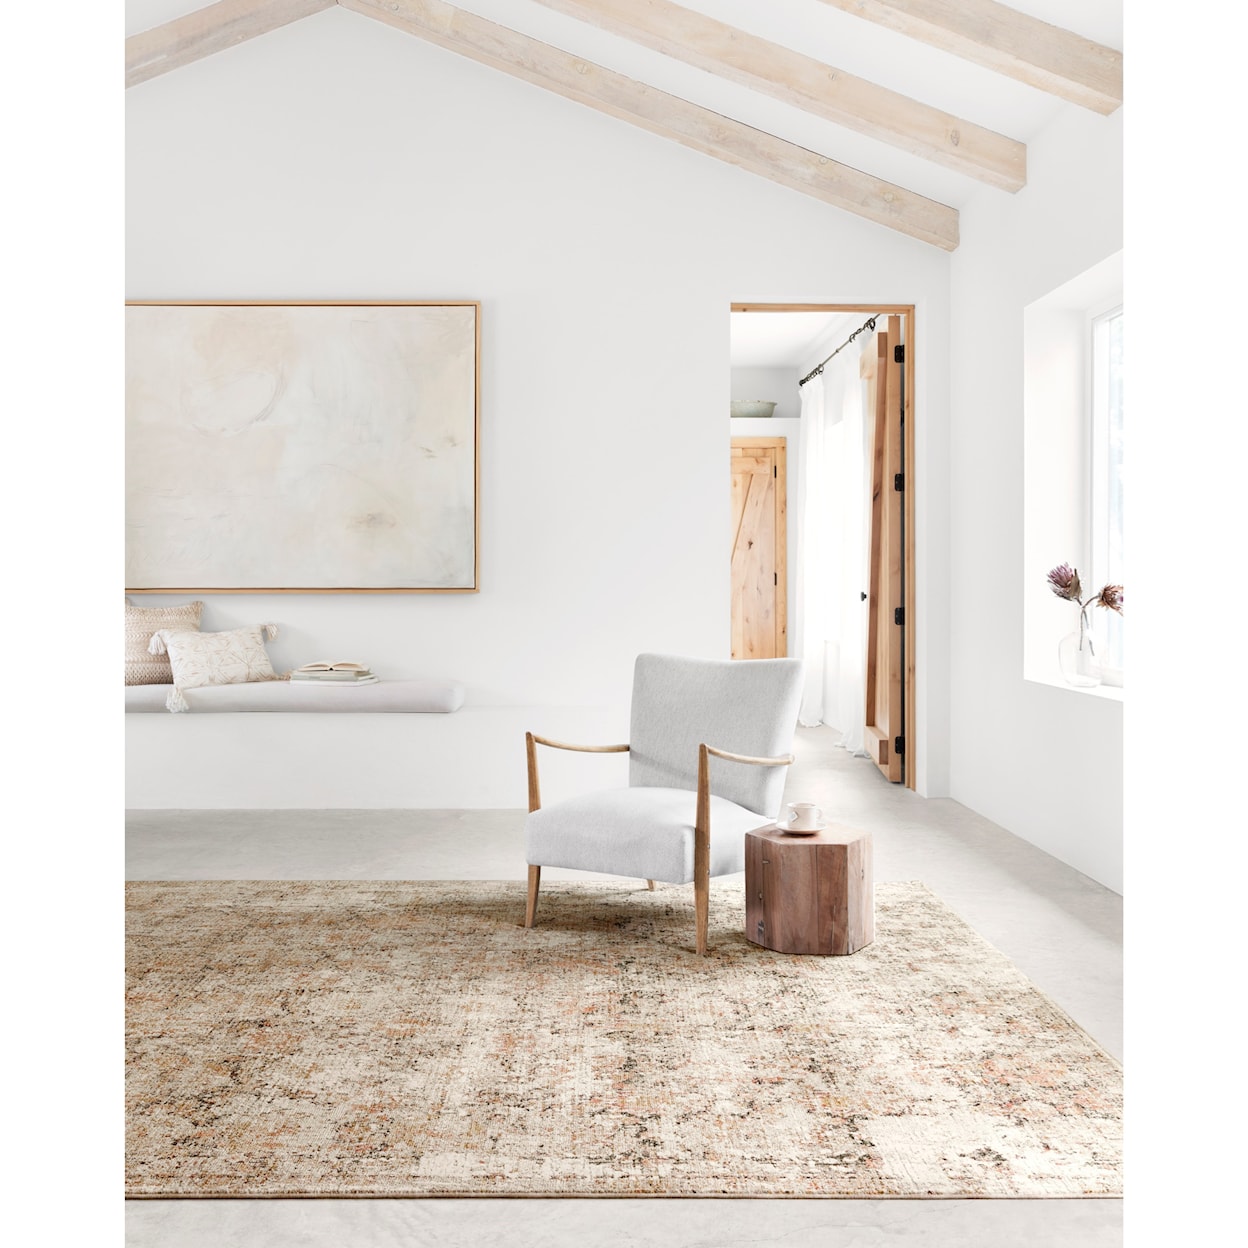 Loloi Rugs Theia 6'7" x 9'6" Taupe / Gold Rug